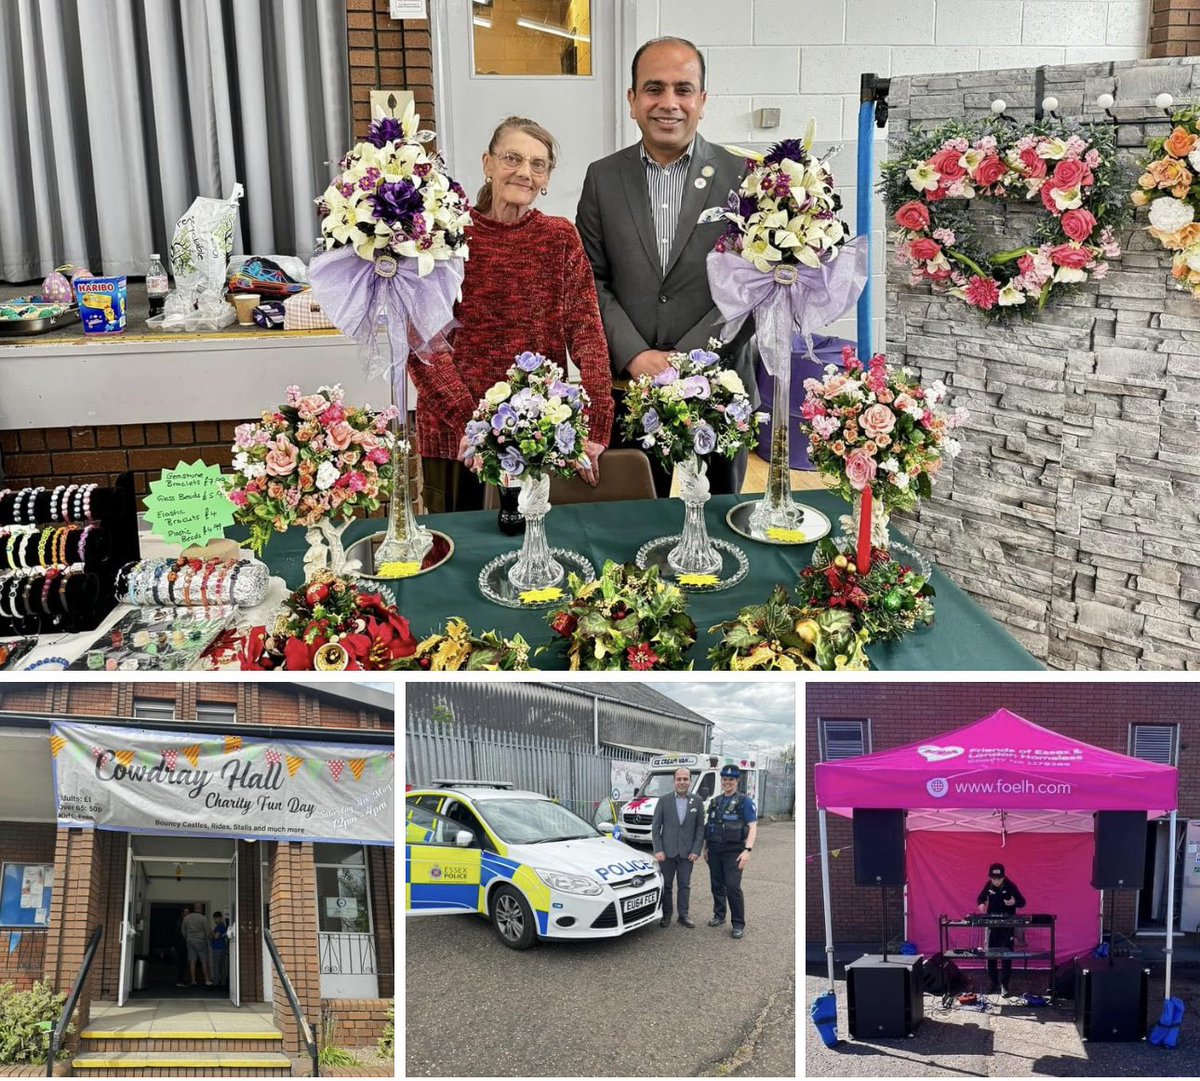 Cowdray Hall Charity fun day in #WestThurrock to raise funds for @TeamFOELH. Thanks to #EssexPolice & other stall holders for attending & supporting this event. Well done to Stuart & team for organising this family event for a good cause.